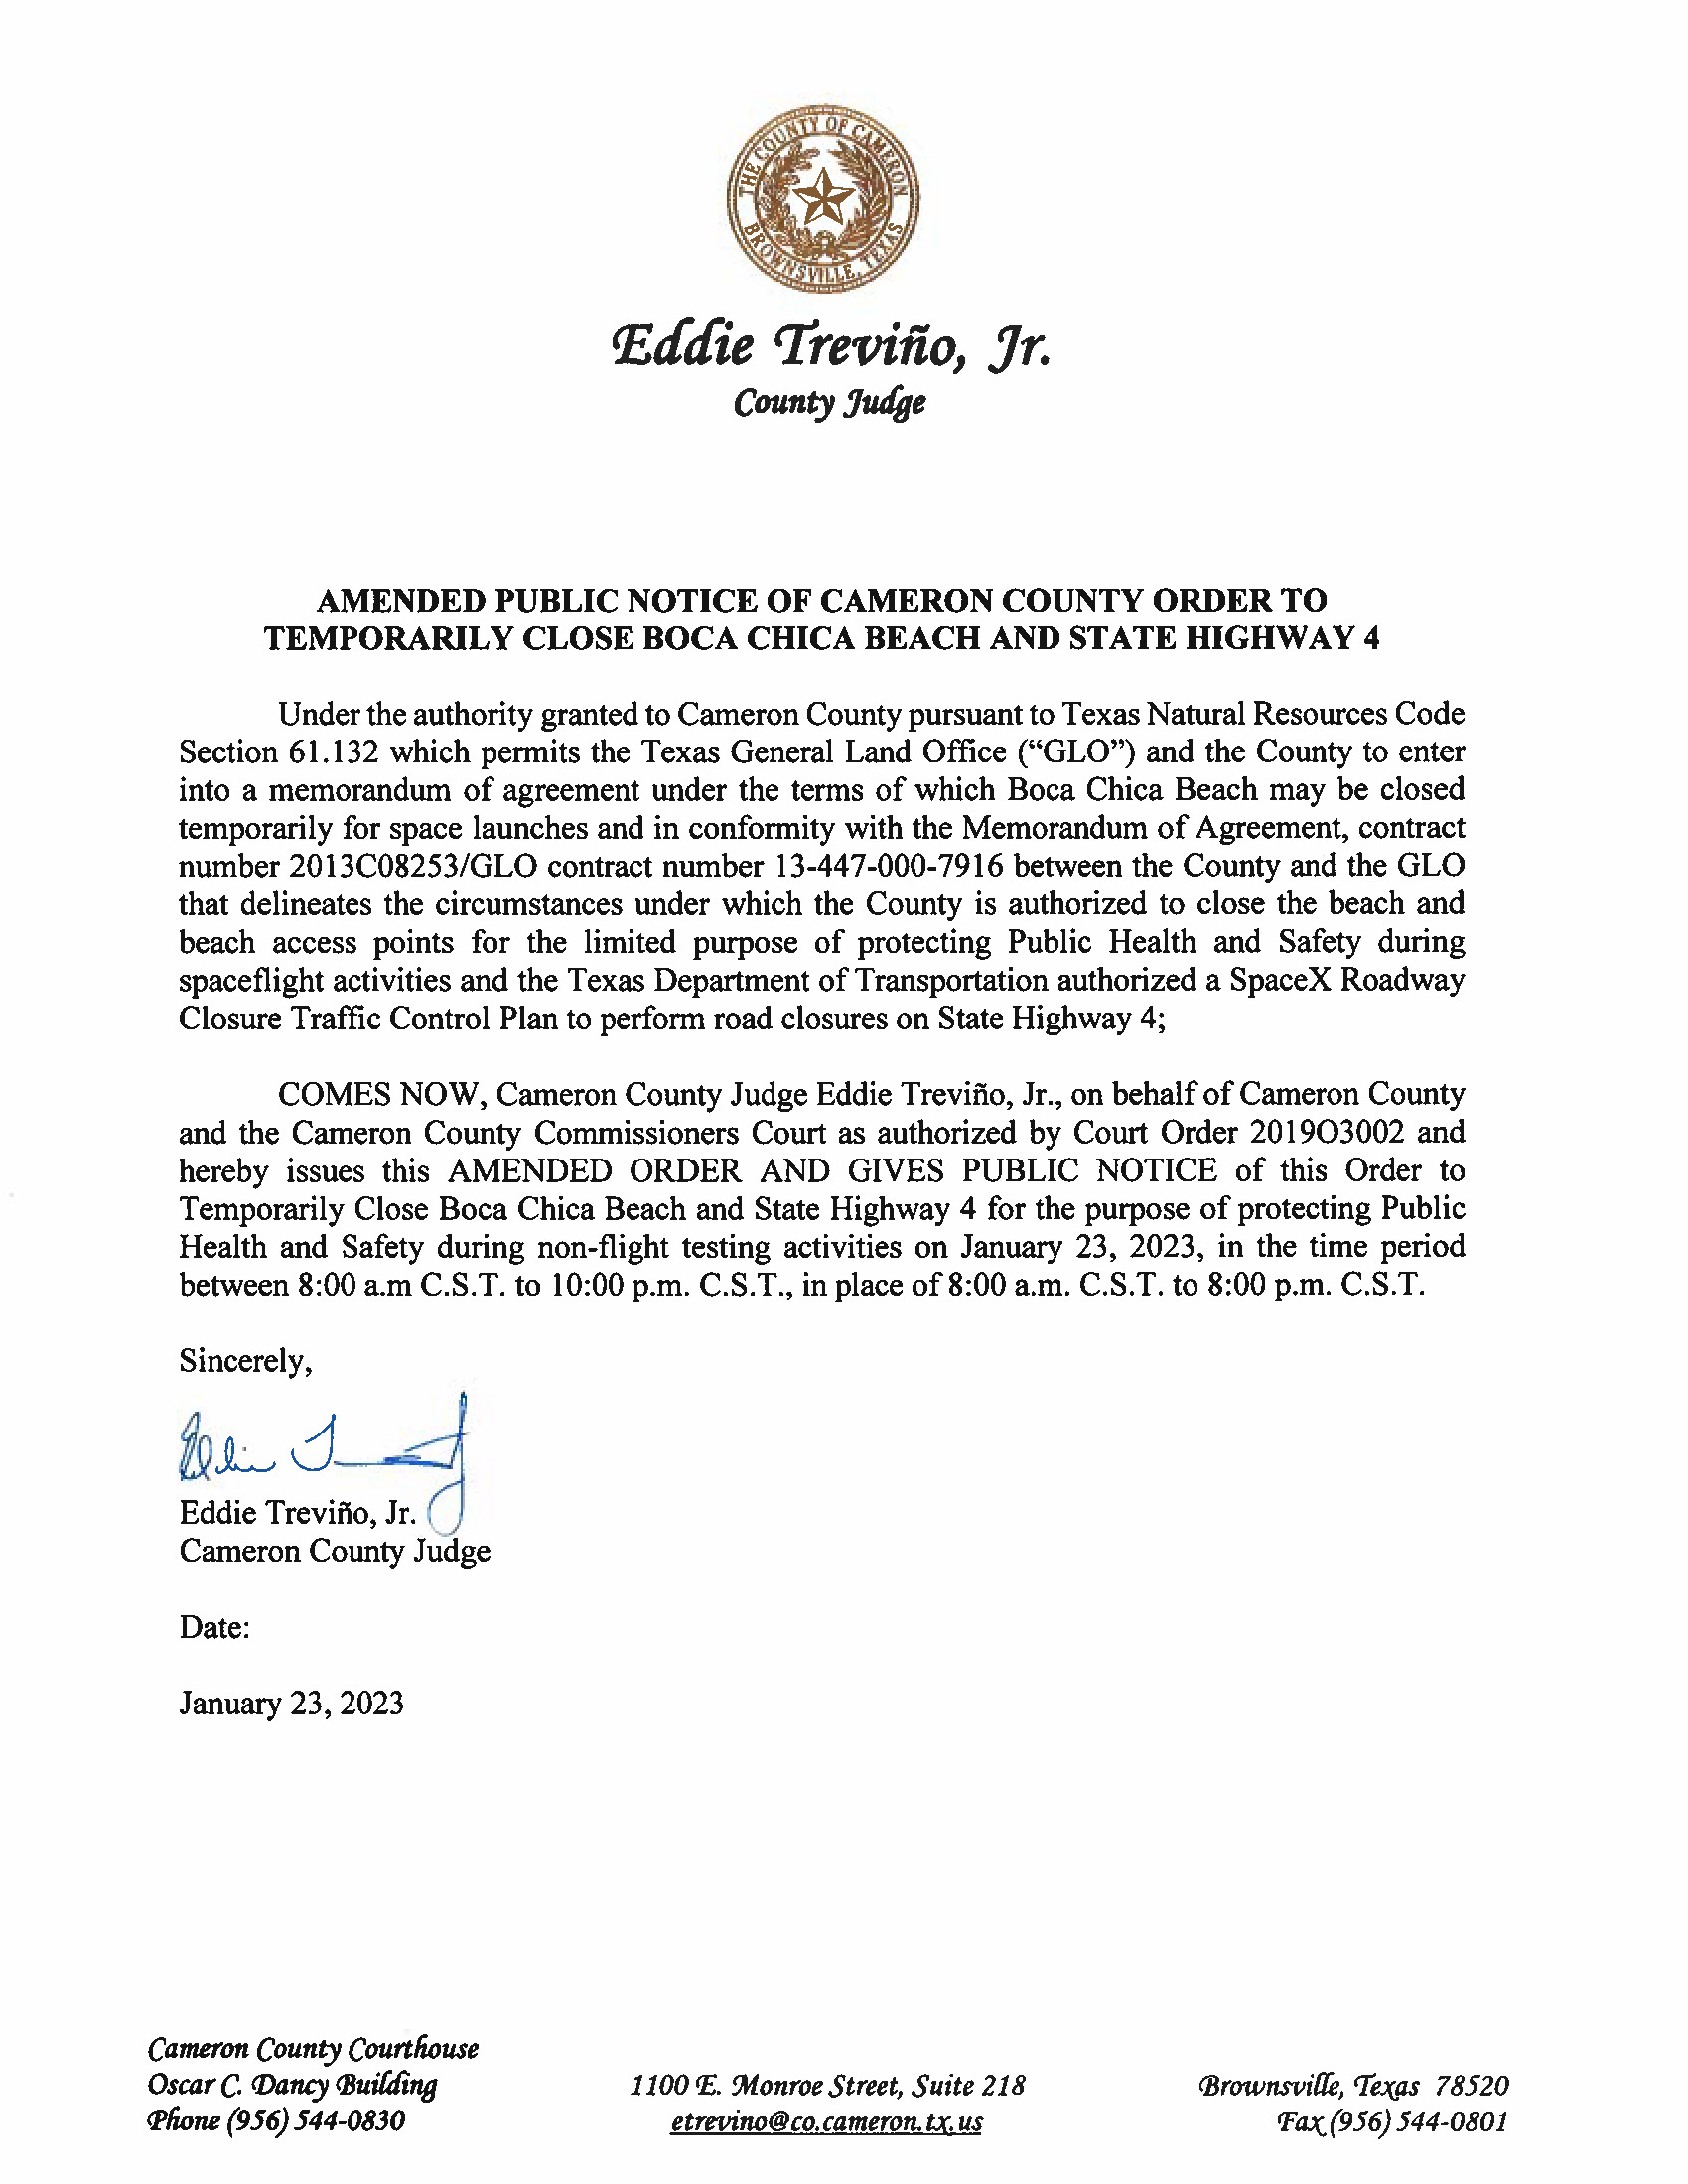 AMENDED PUBLIC NOTICE OF CAMERON COUNTY ORDER TO TEMP. BEACH CLOSURE AND HWY.01.23.2023